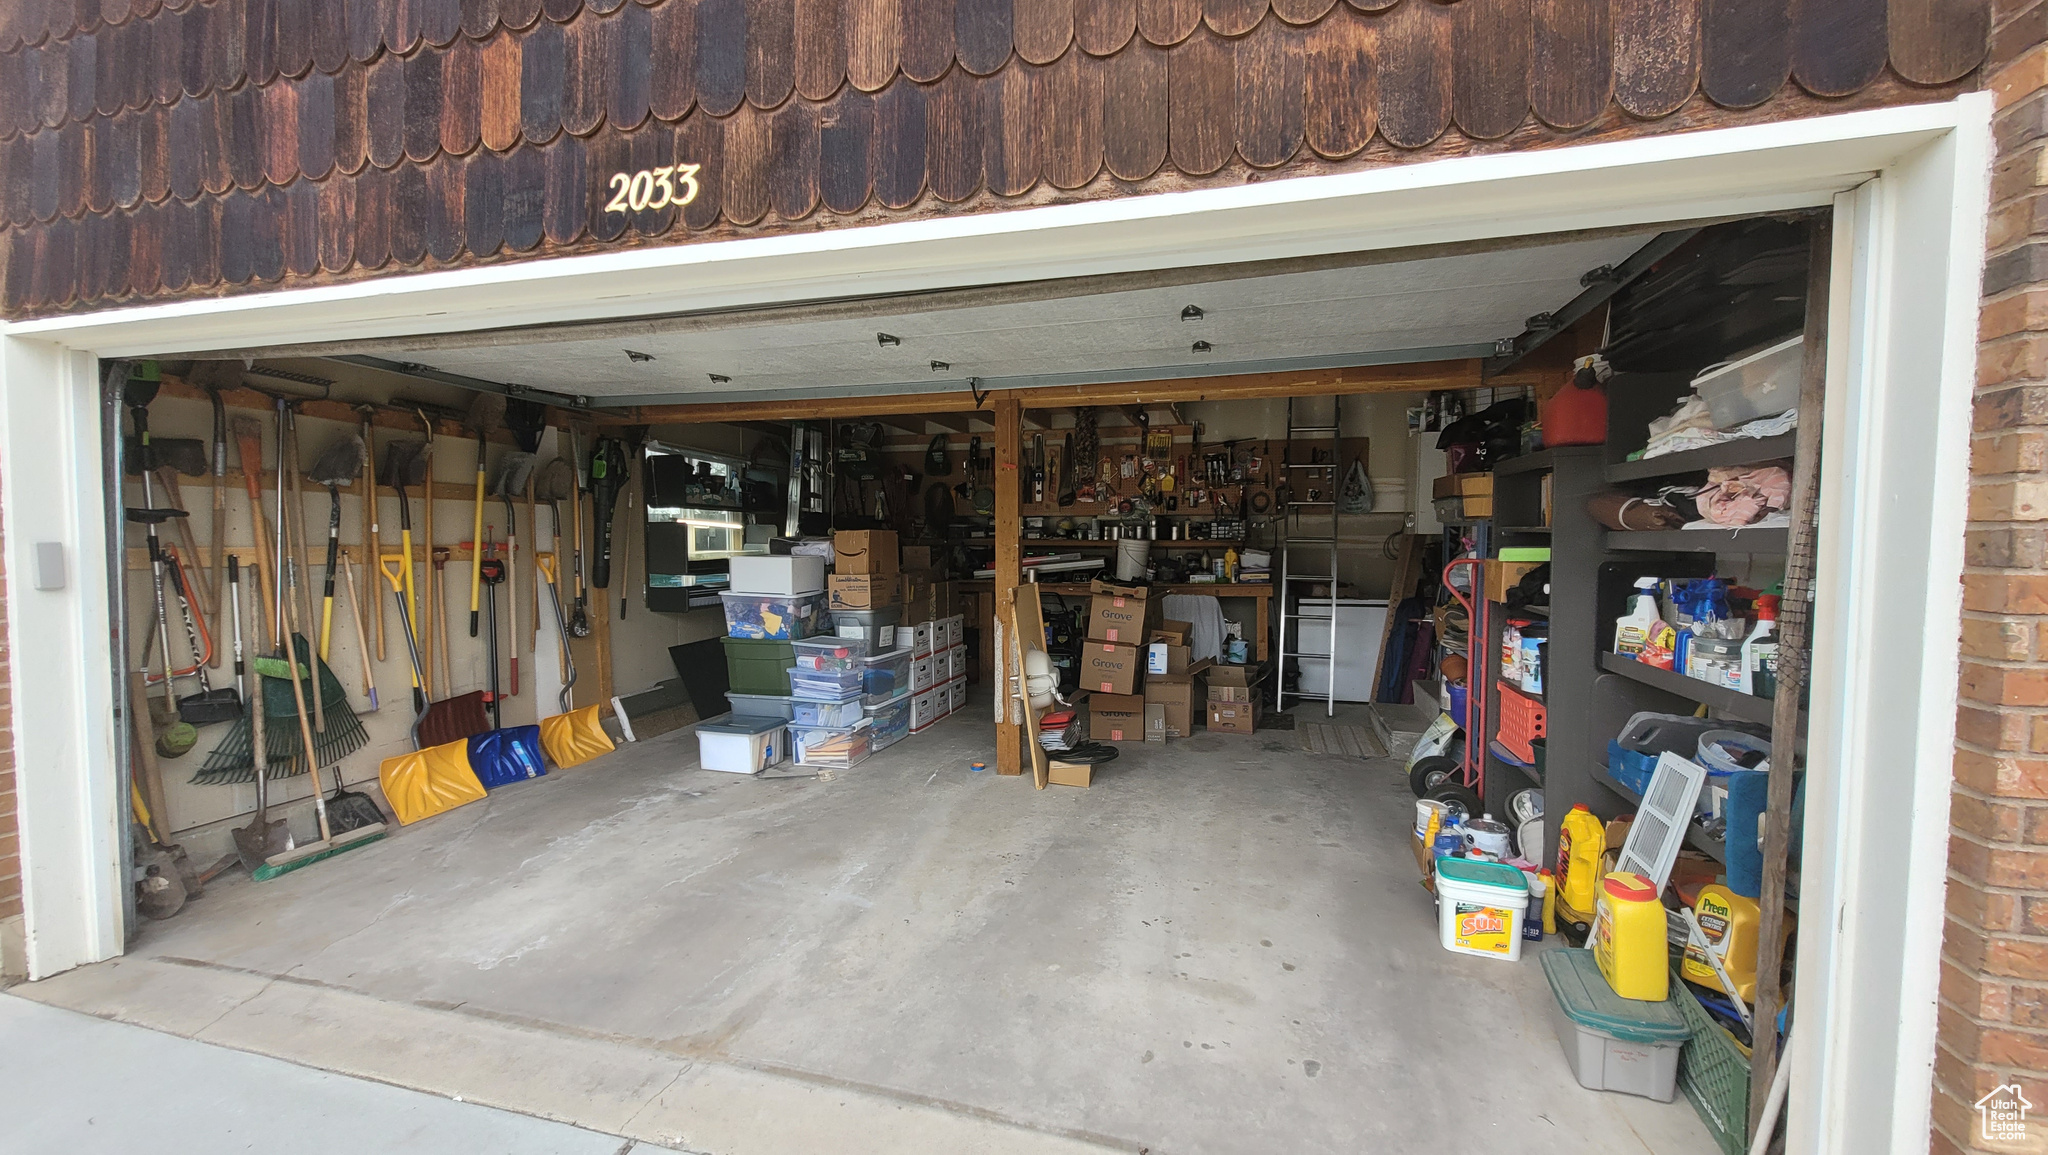 View of garage with work bench